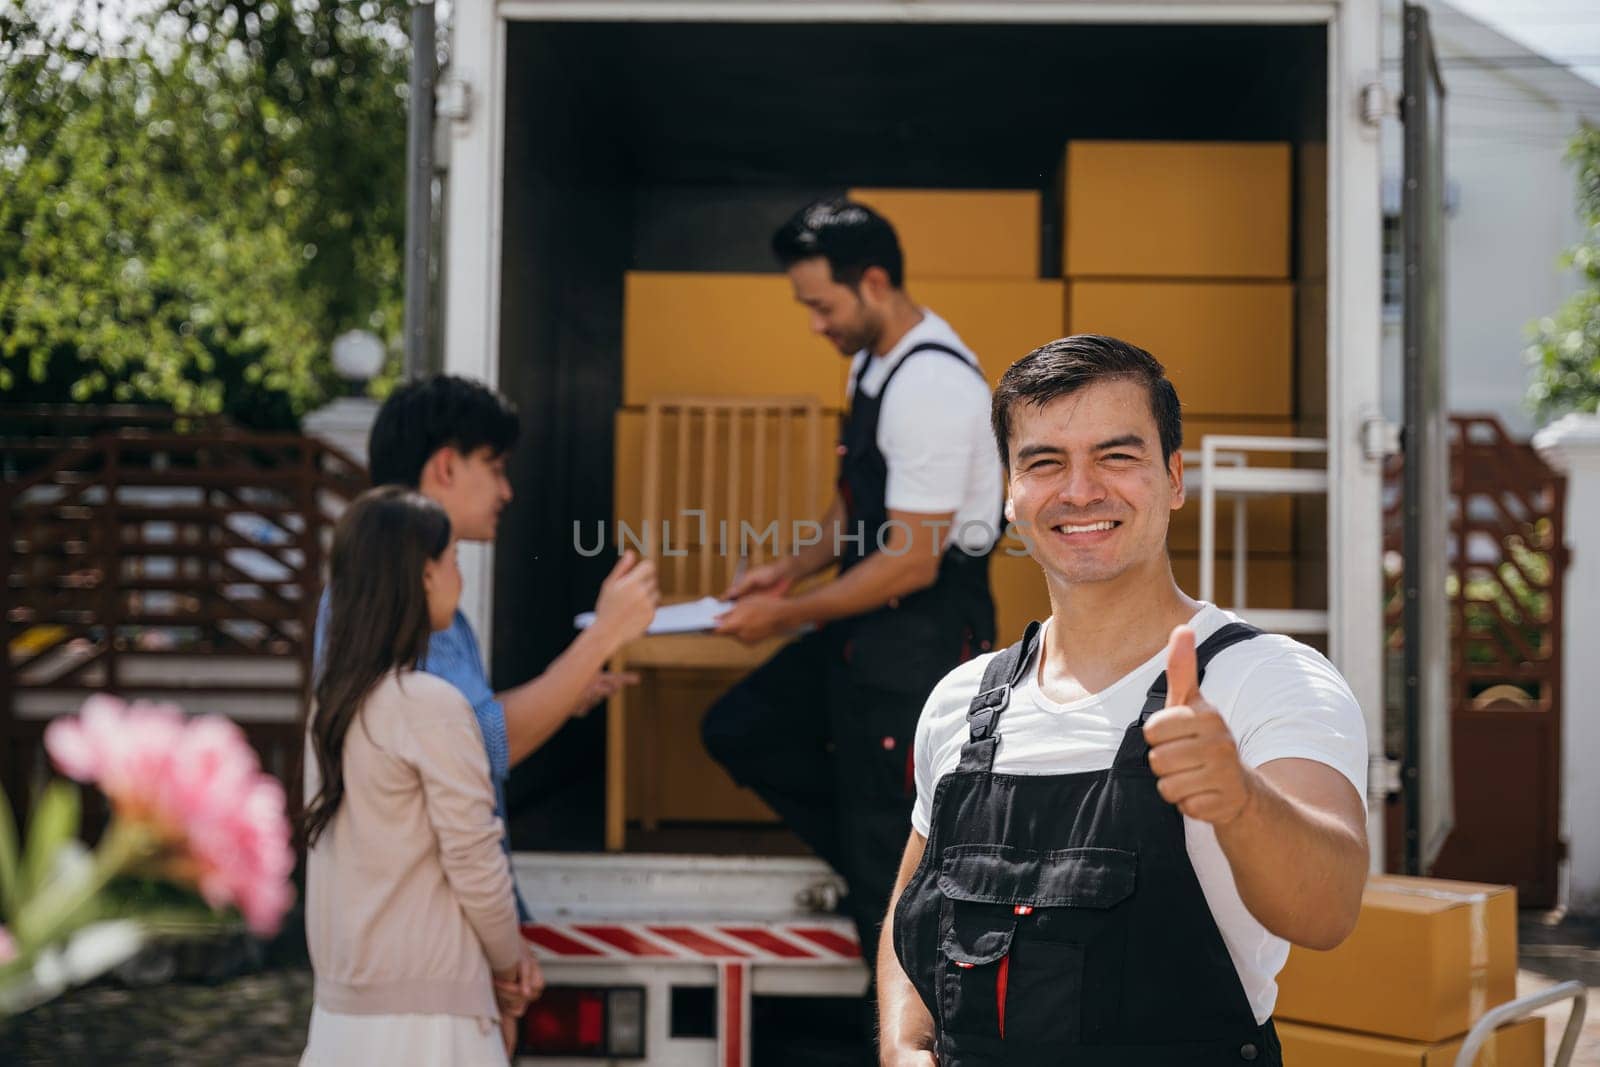 A smiling mover captured in a portrait unloads boxes into a new home from a truck. These removal company workers guarantee efficient moving and happiness. Moving day concept